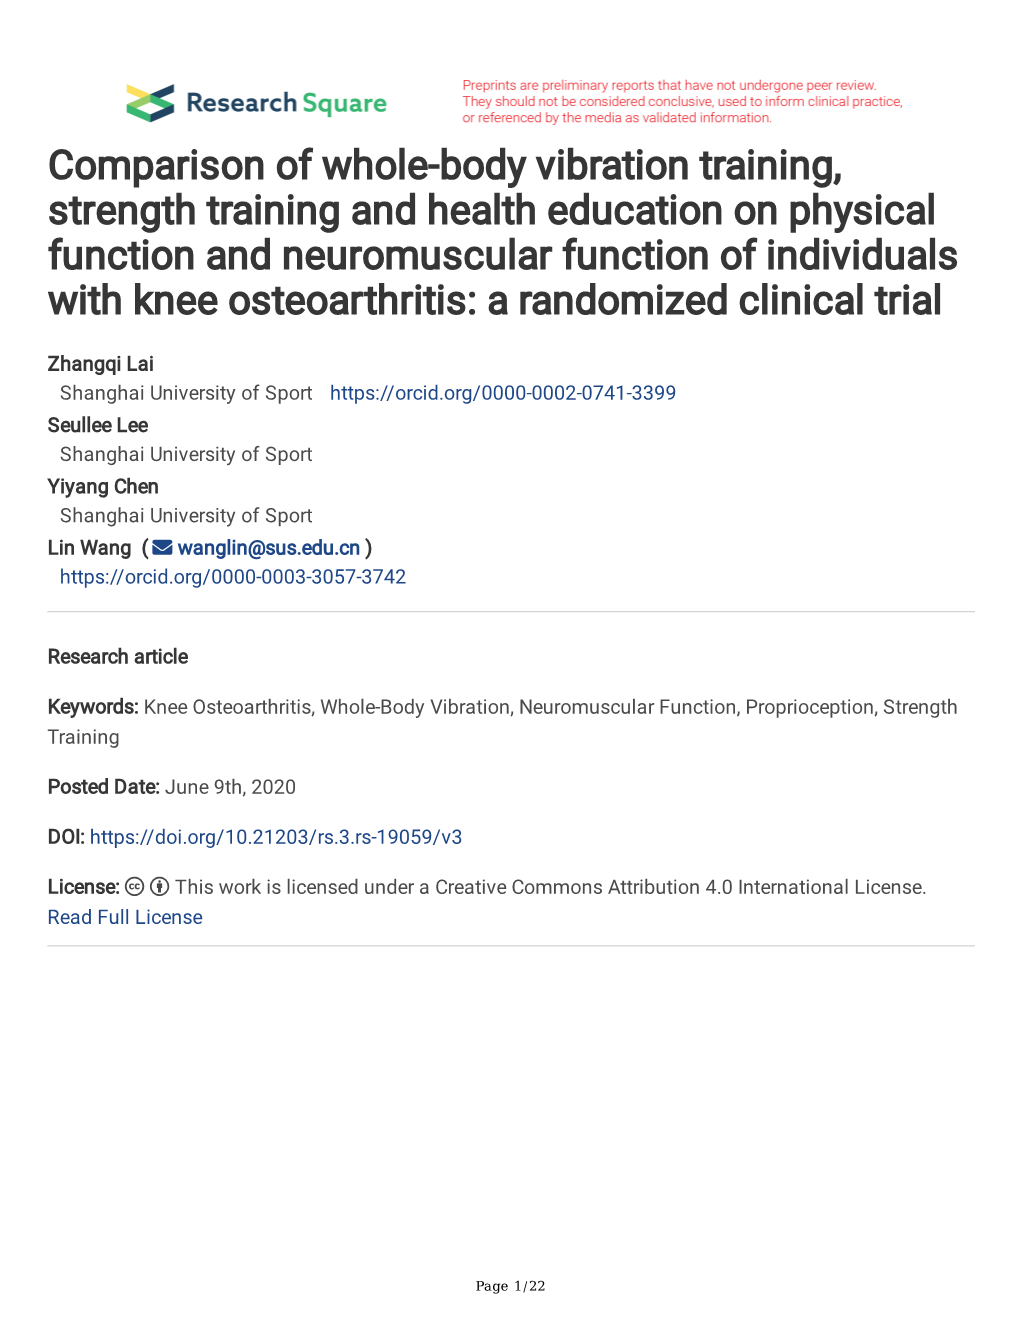 Comparison of Whole-Body Vibration Training, Strength Training and Health Education on Physical Function and Neuromuscular Funct